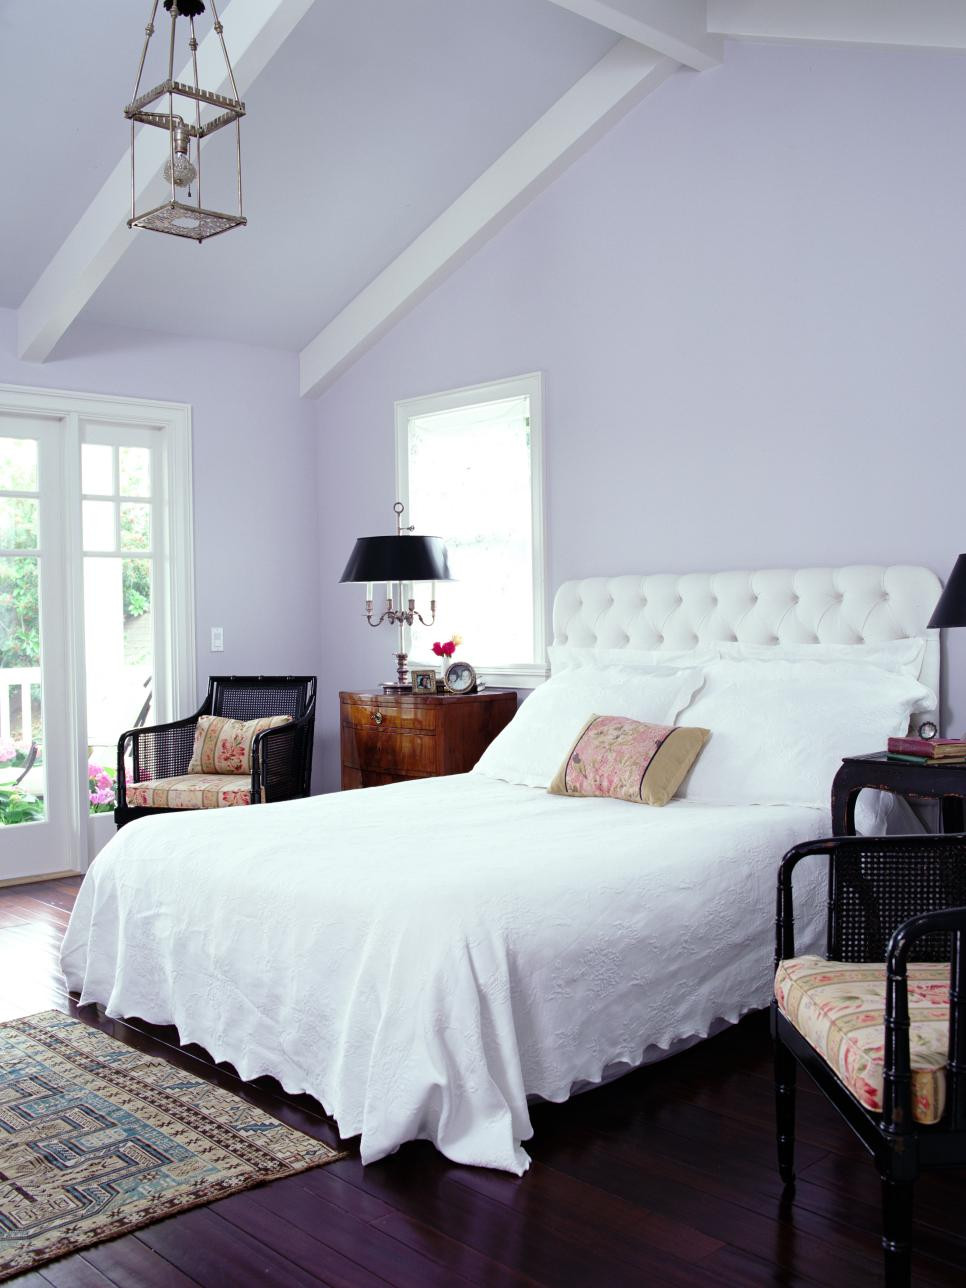 Lavender Paint For Bedroom
 10 Bedrooms to Inspire You to Go Lavender